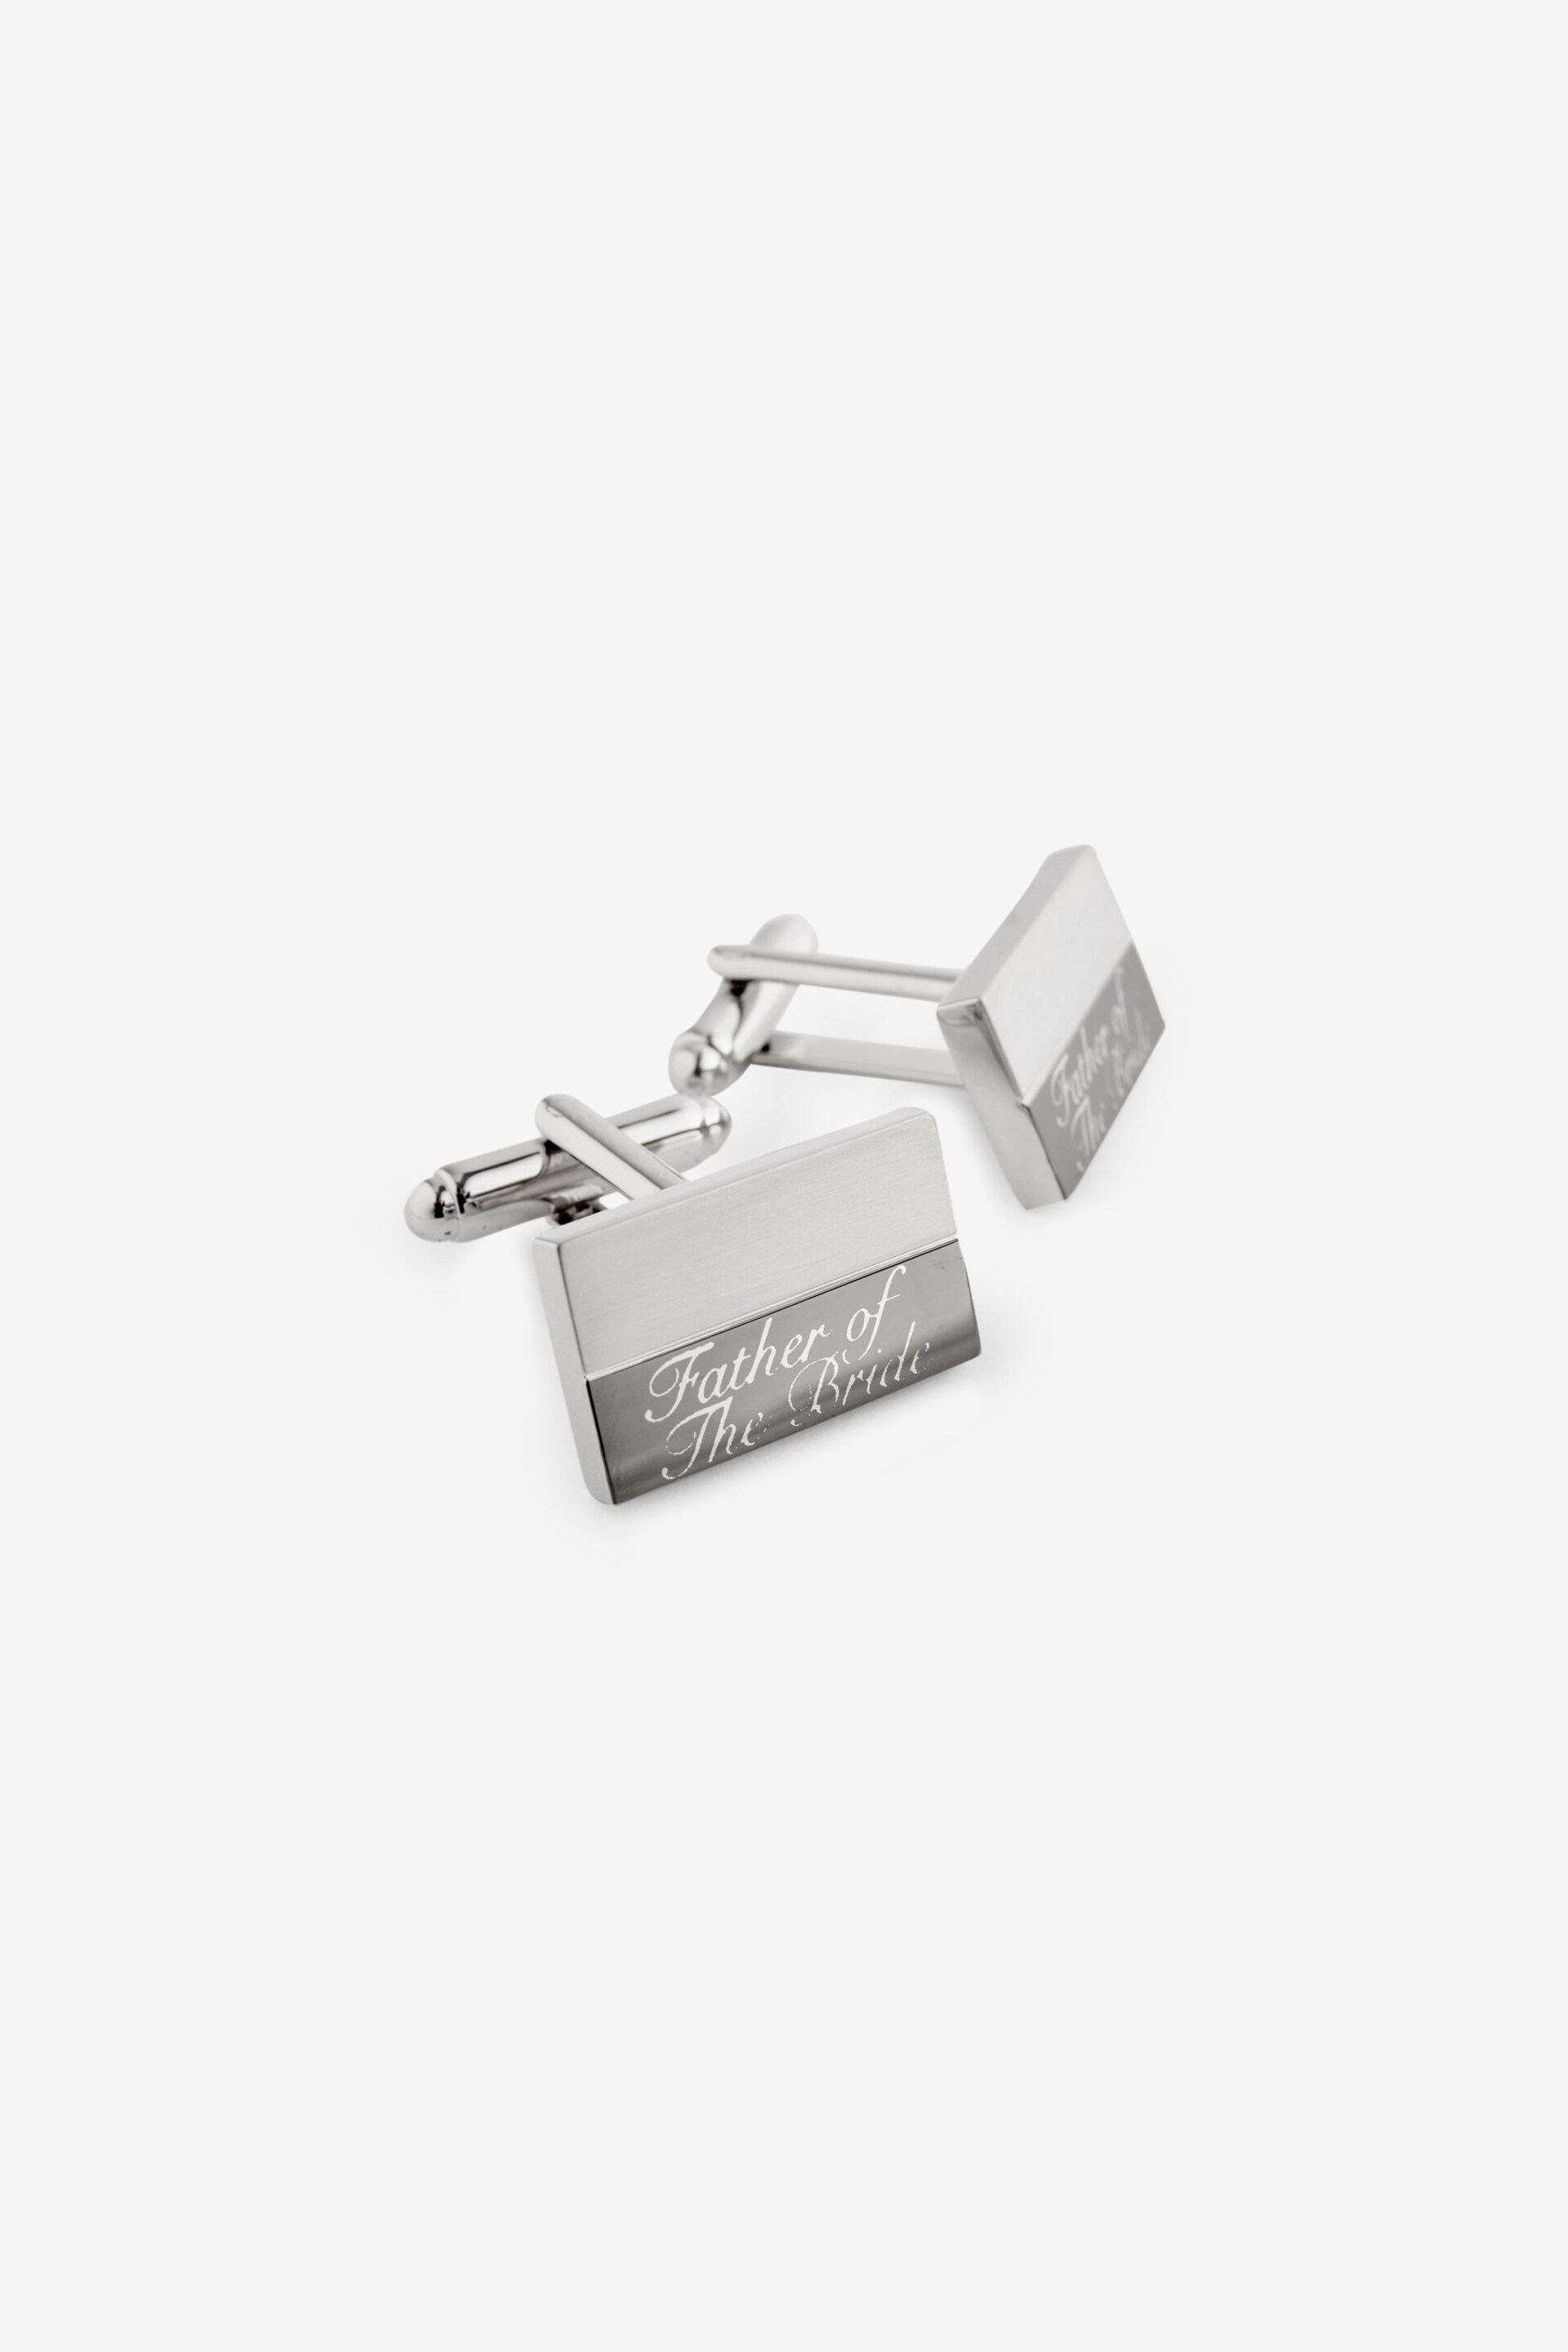 Silver Tone Father of the Bride Engraved Wedding Cufflinks - Image 1 of 7